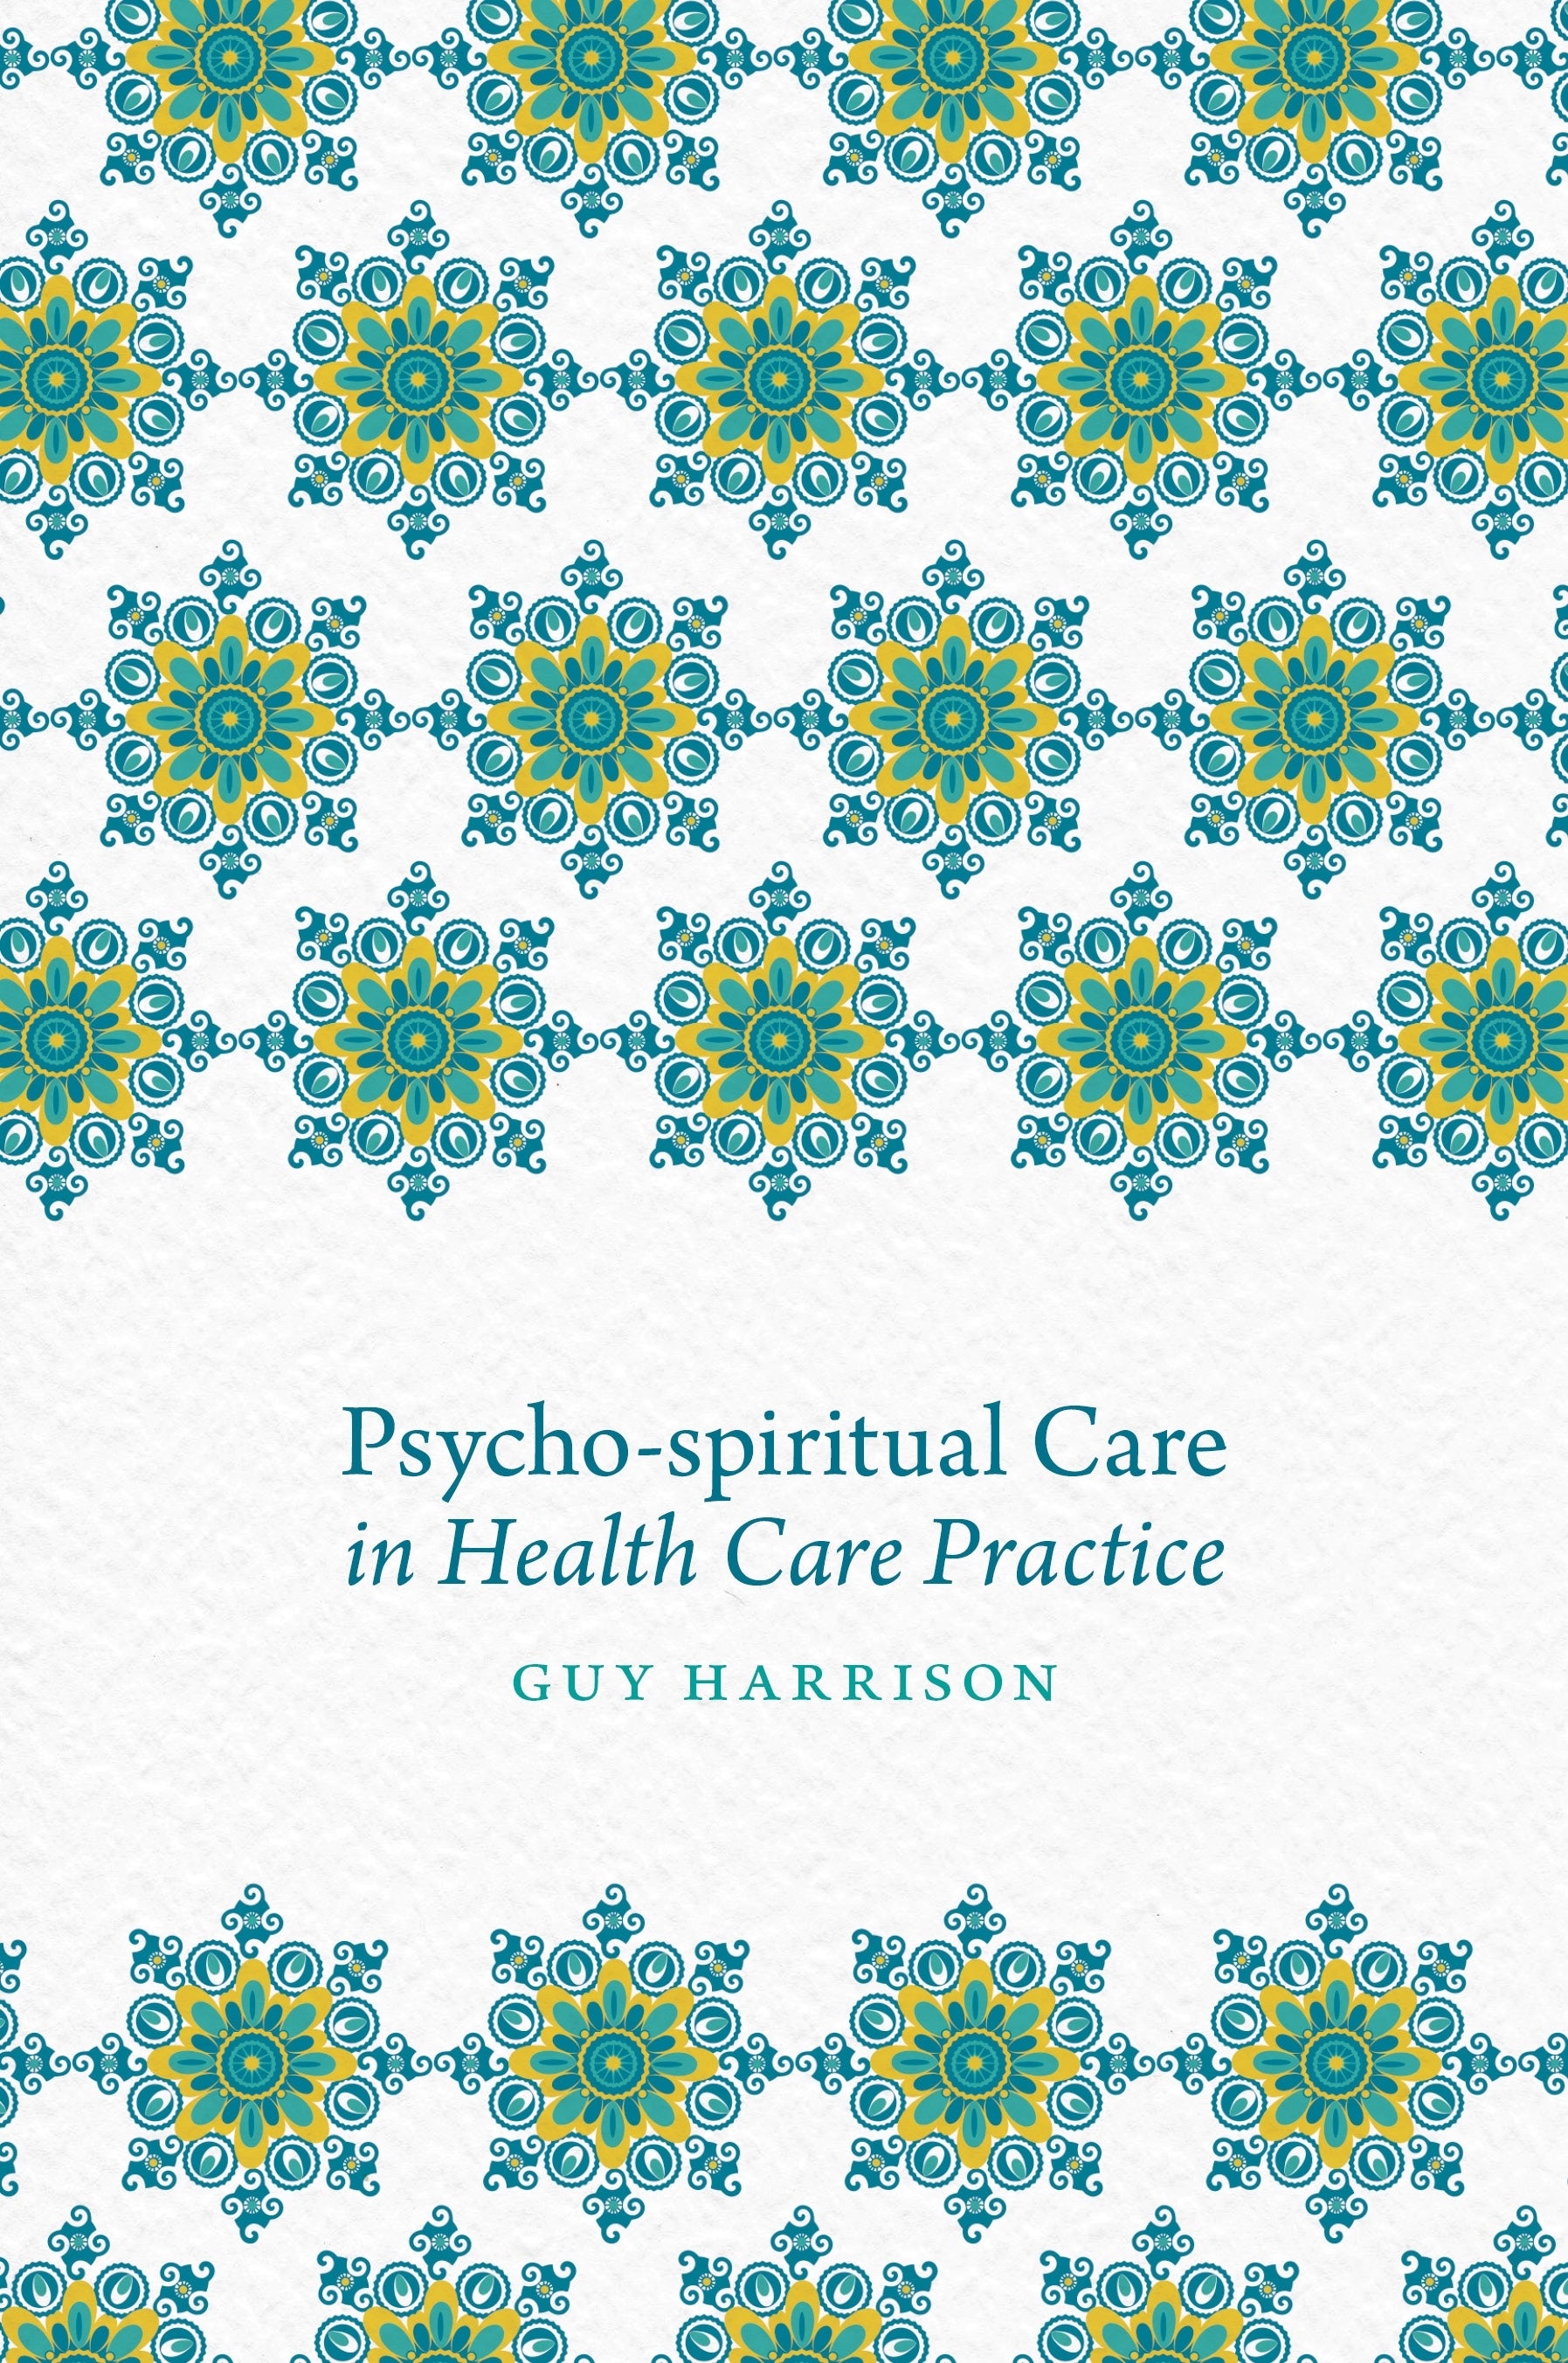 Psycho-spiritual Care in Health Care Practice by Guy Harrison, No Author Listed